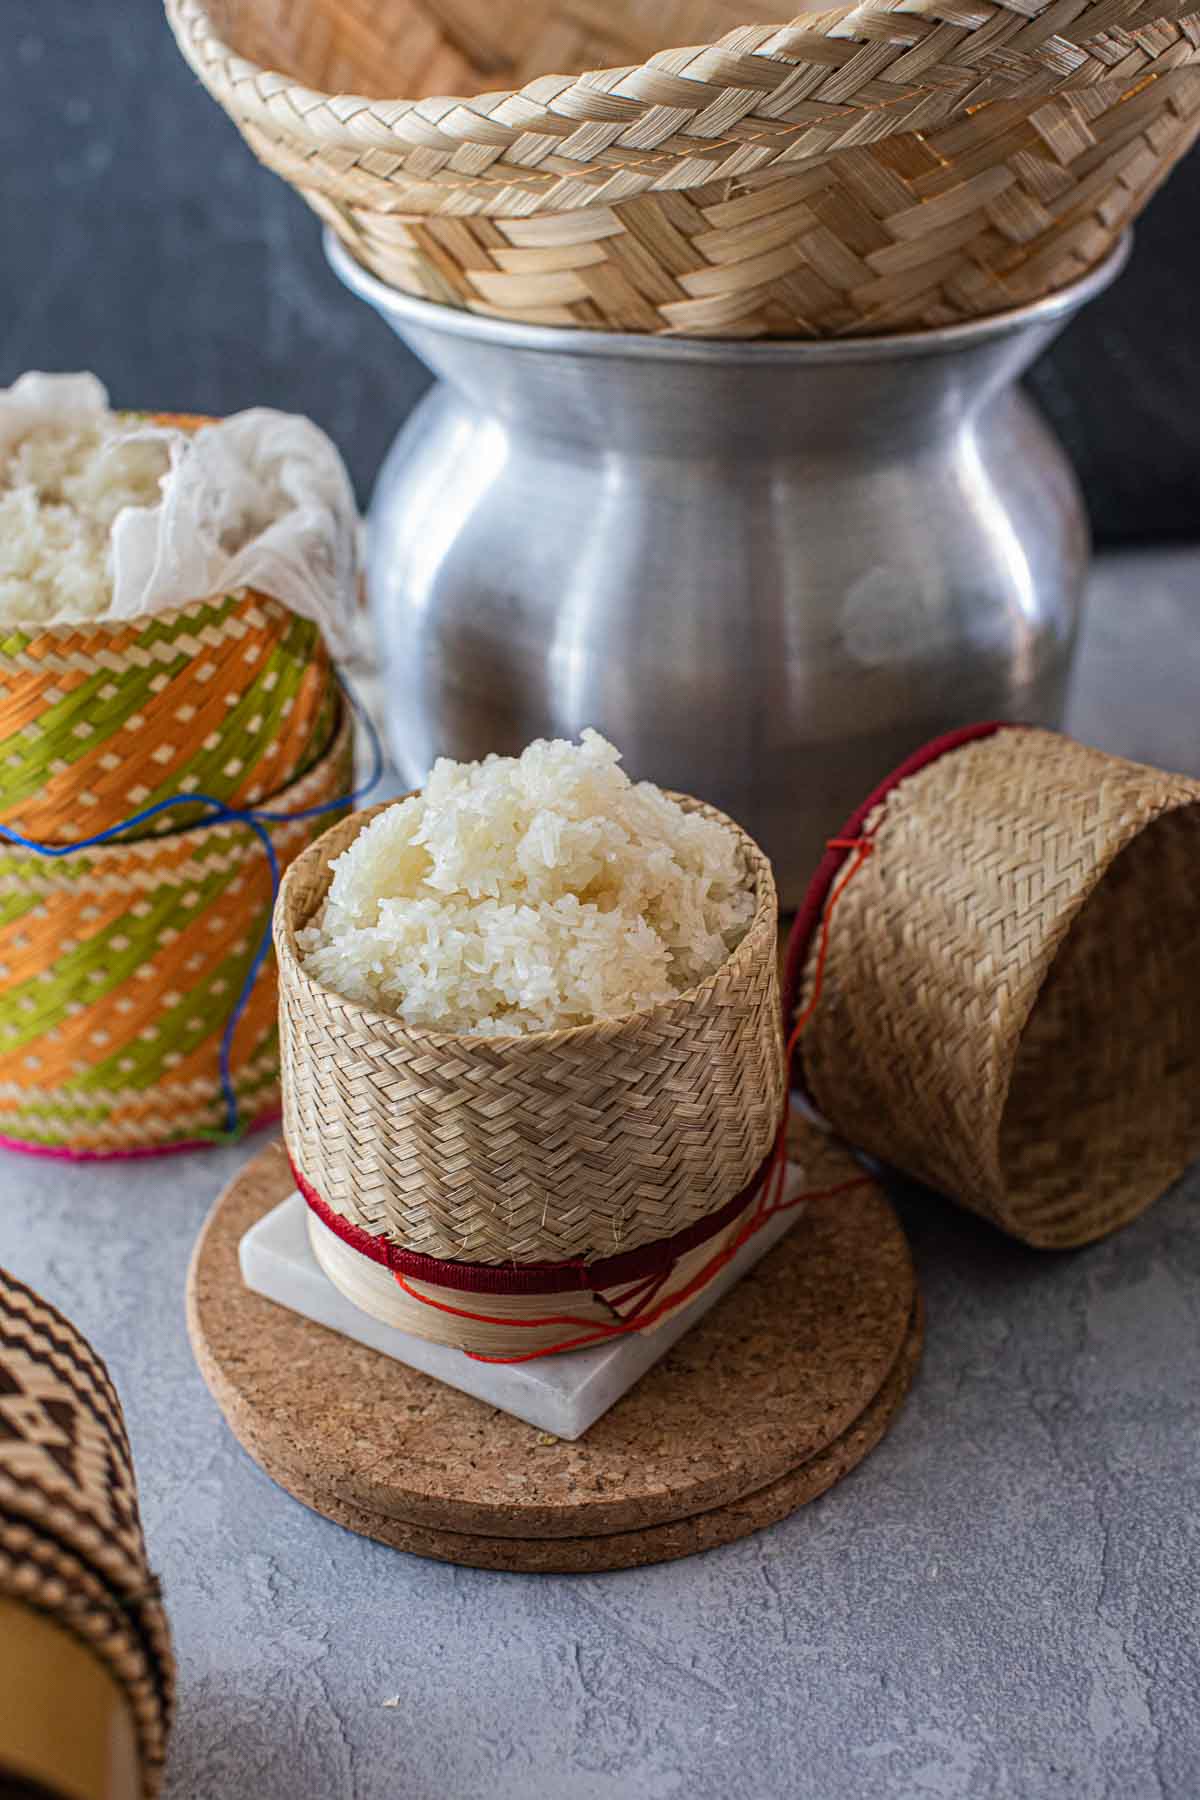 How to Make Thai Sticky Rice in a Bamboo Steamer - Simply Suwanee